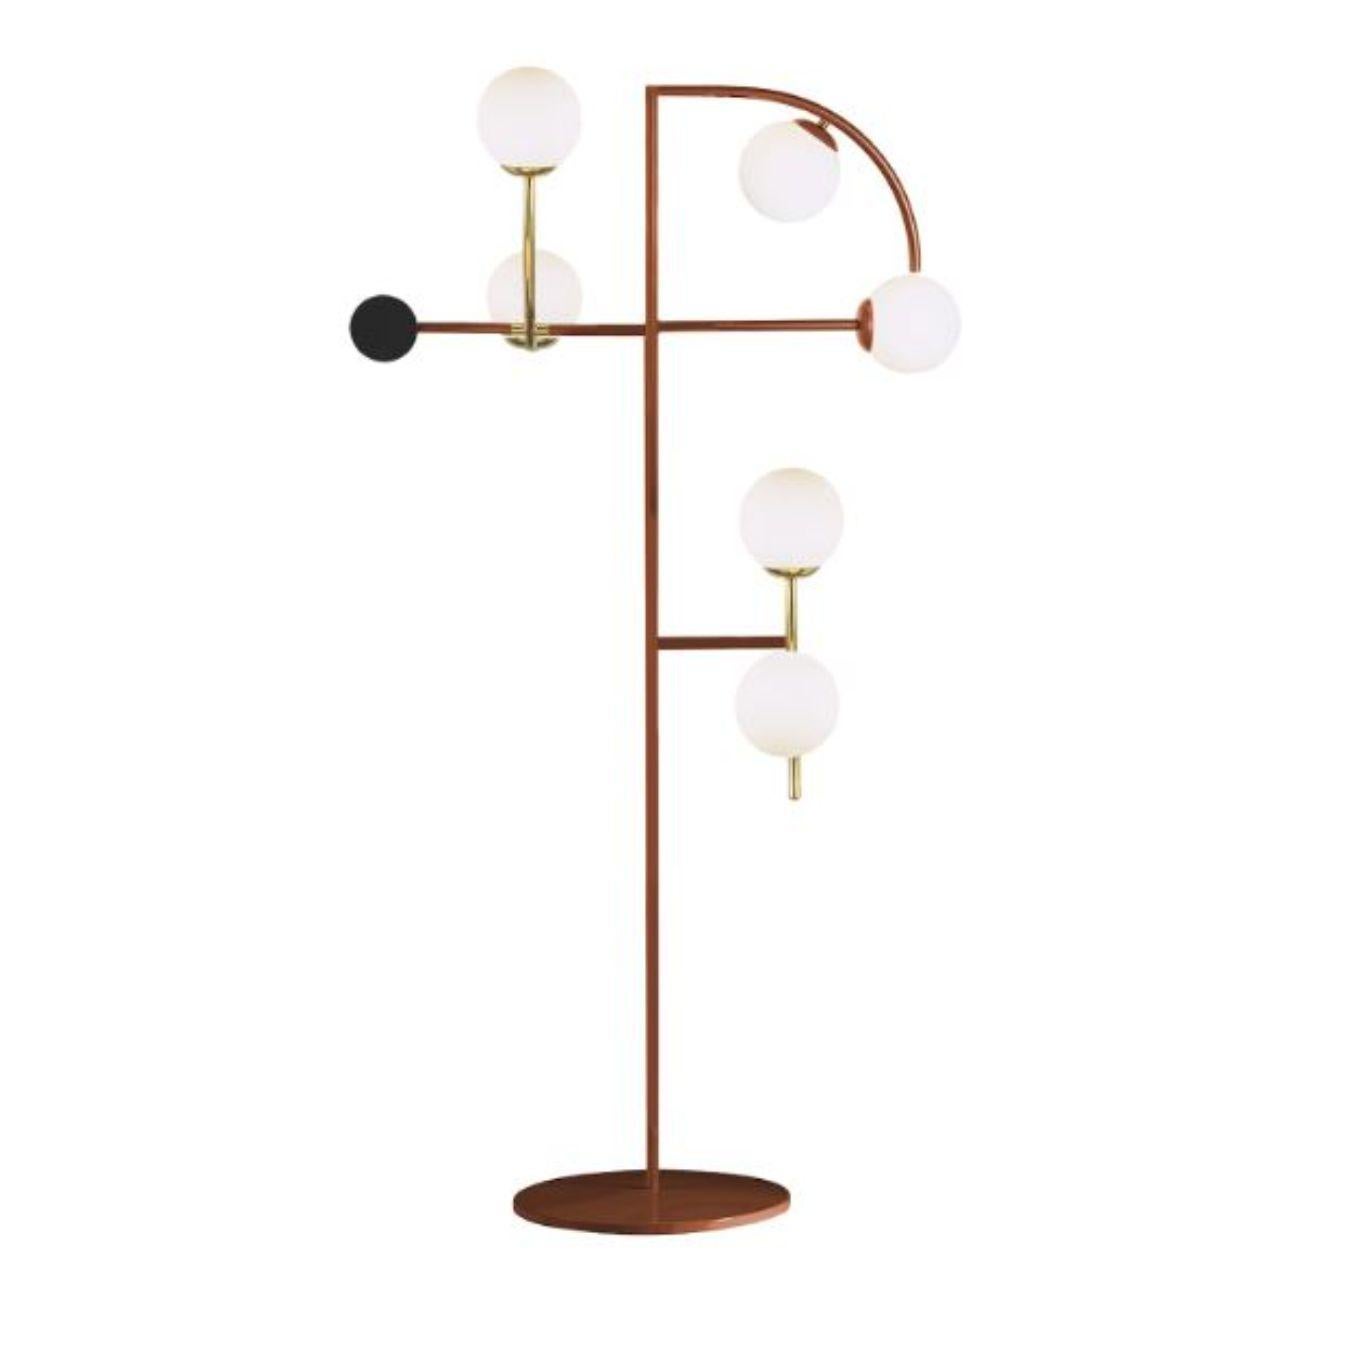 Copper Helio floor lamp by Dooq
Dimensions: W 95 x D 30 x H 169 cm
Materials: lacquered metal, brass/nickel
Also available in different colors and materials. 

Information:
230V/50Hz
6 x max. G9
4W LED

120V/60Hz
6 x max. G9
4W